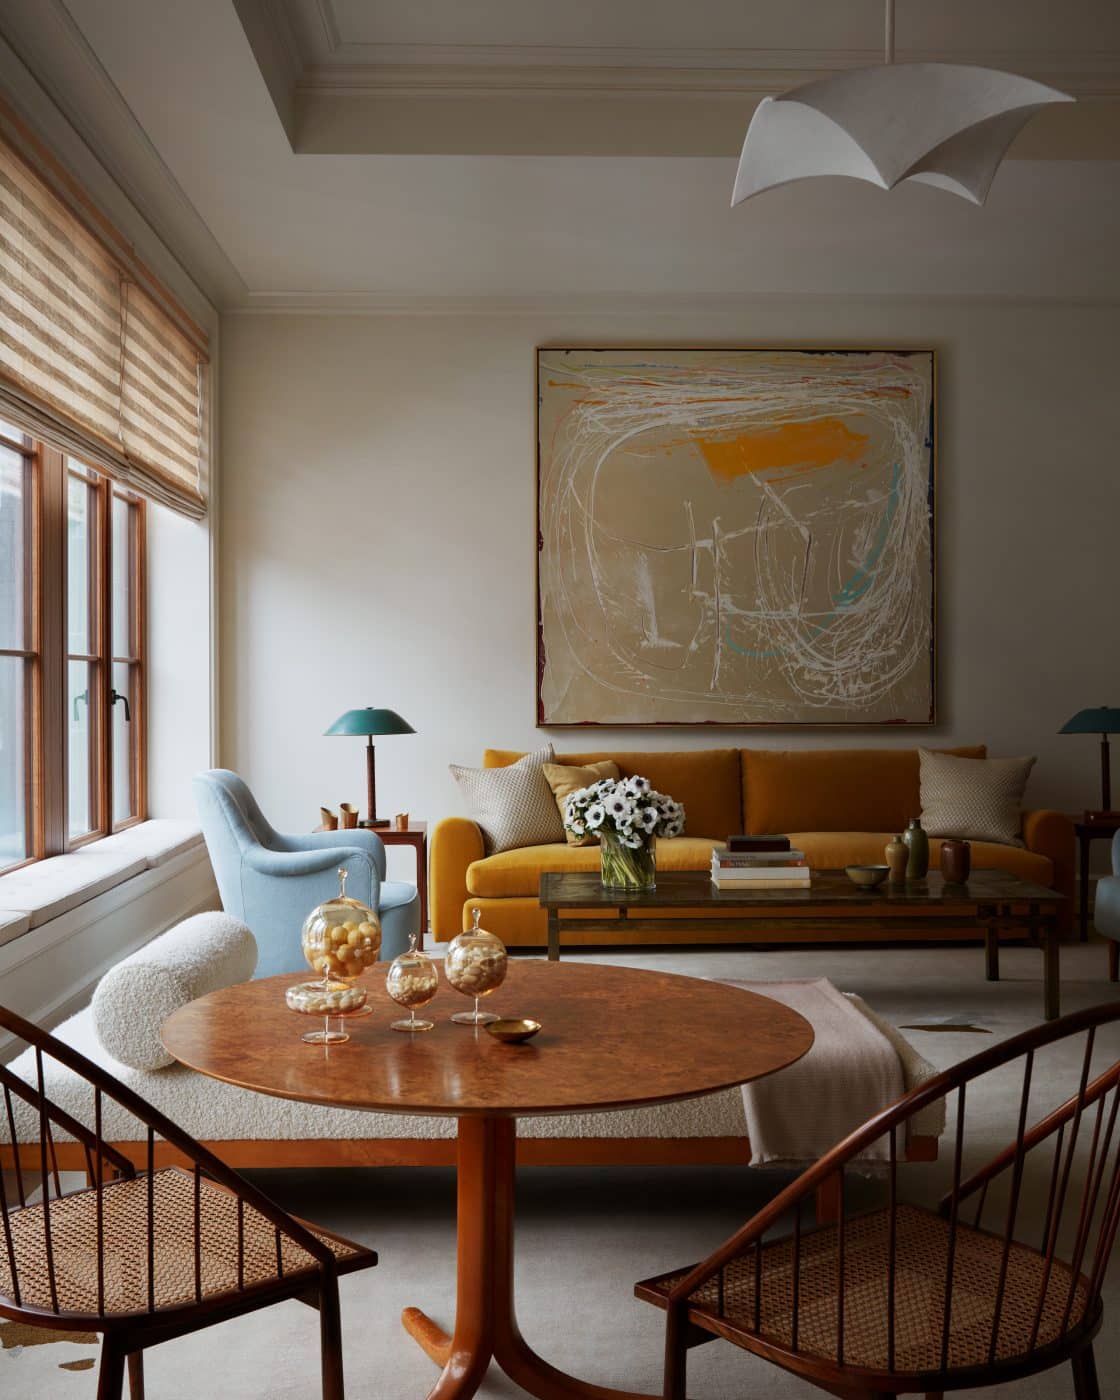 Living room of apartment in Fitzroy building in New York City by interior designer Shawn Henderson